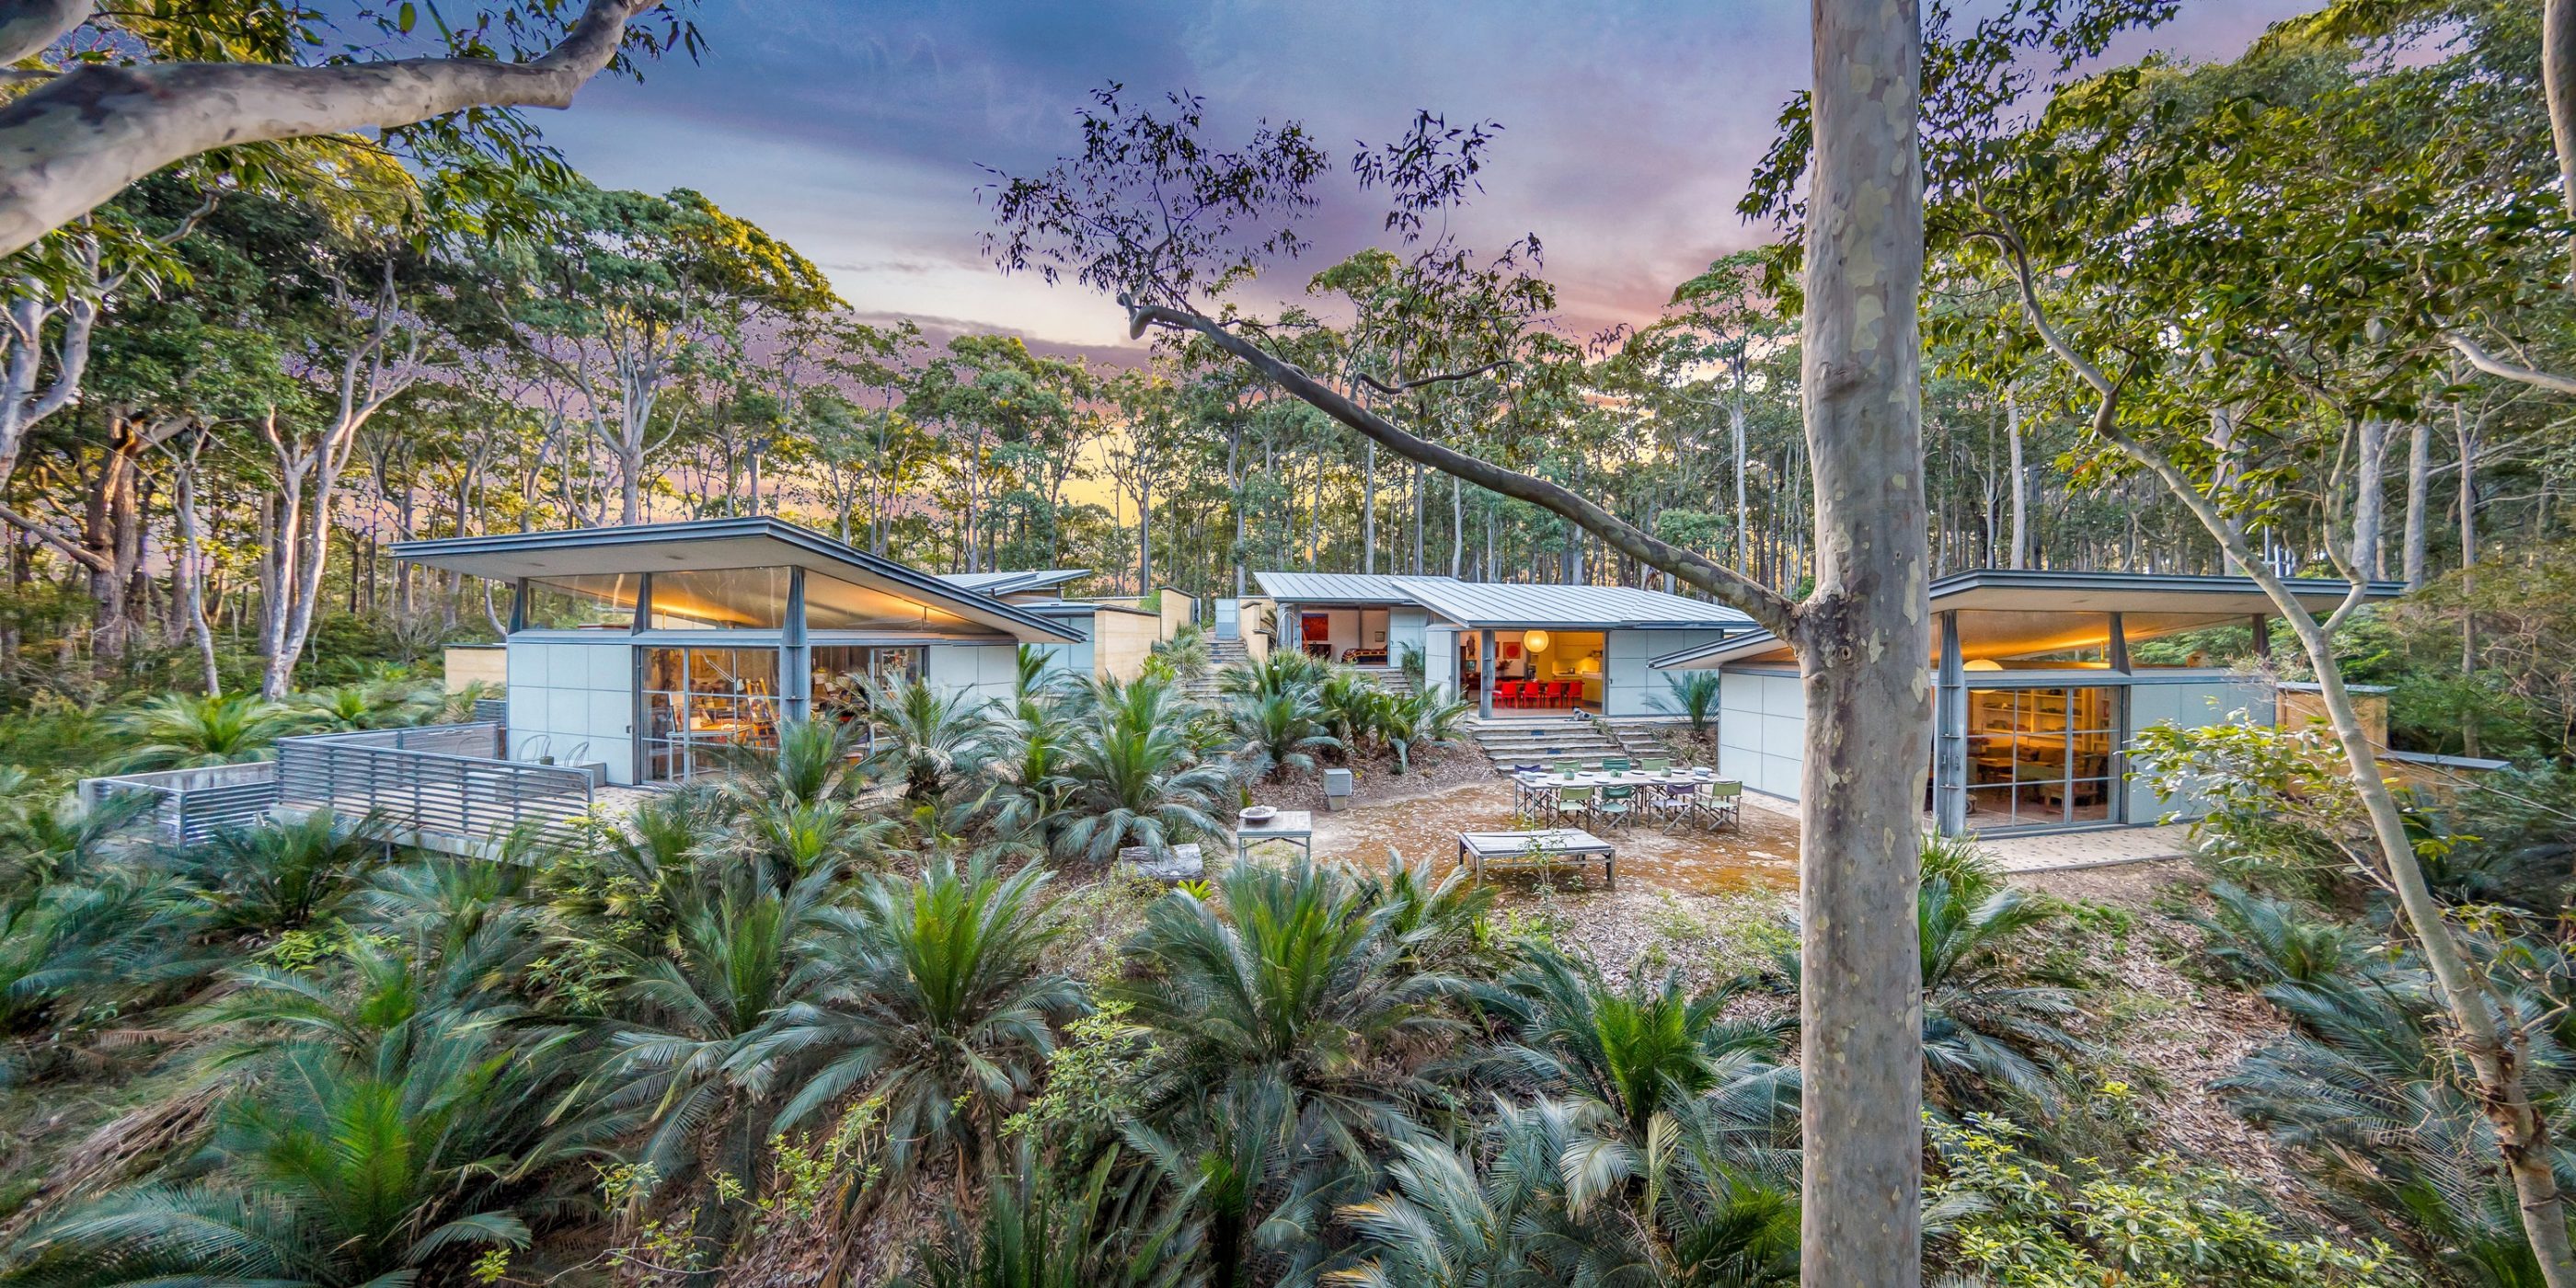 Secluded South Coast hideaway comes with its own private beach